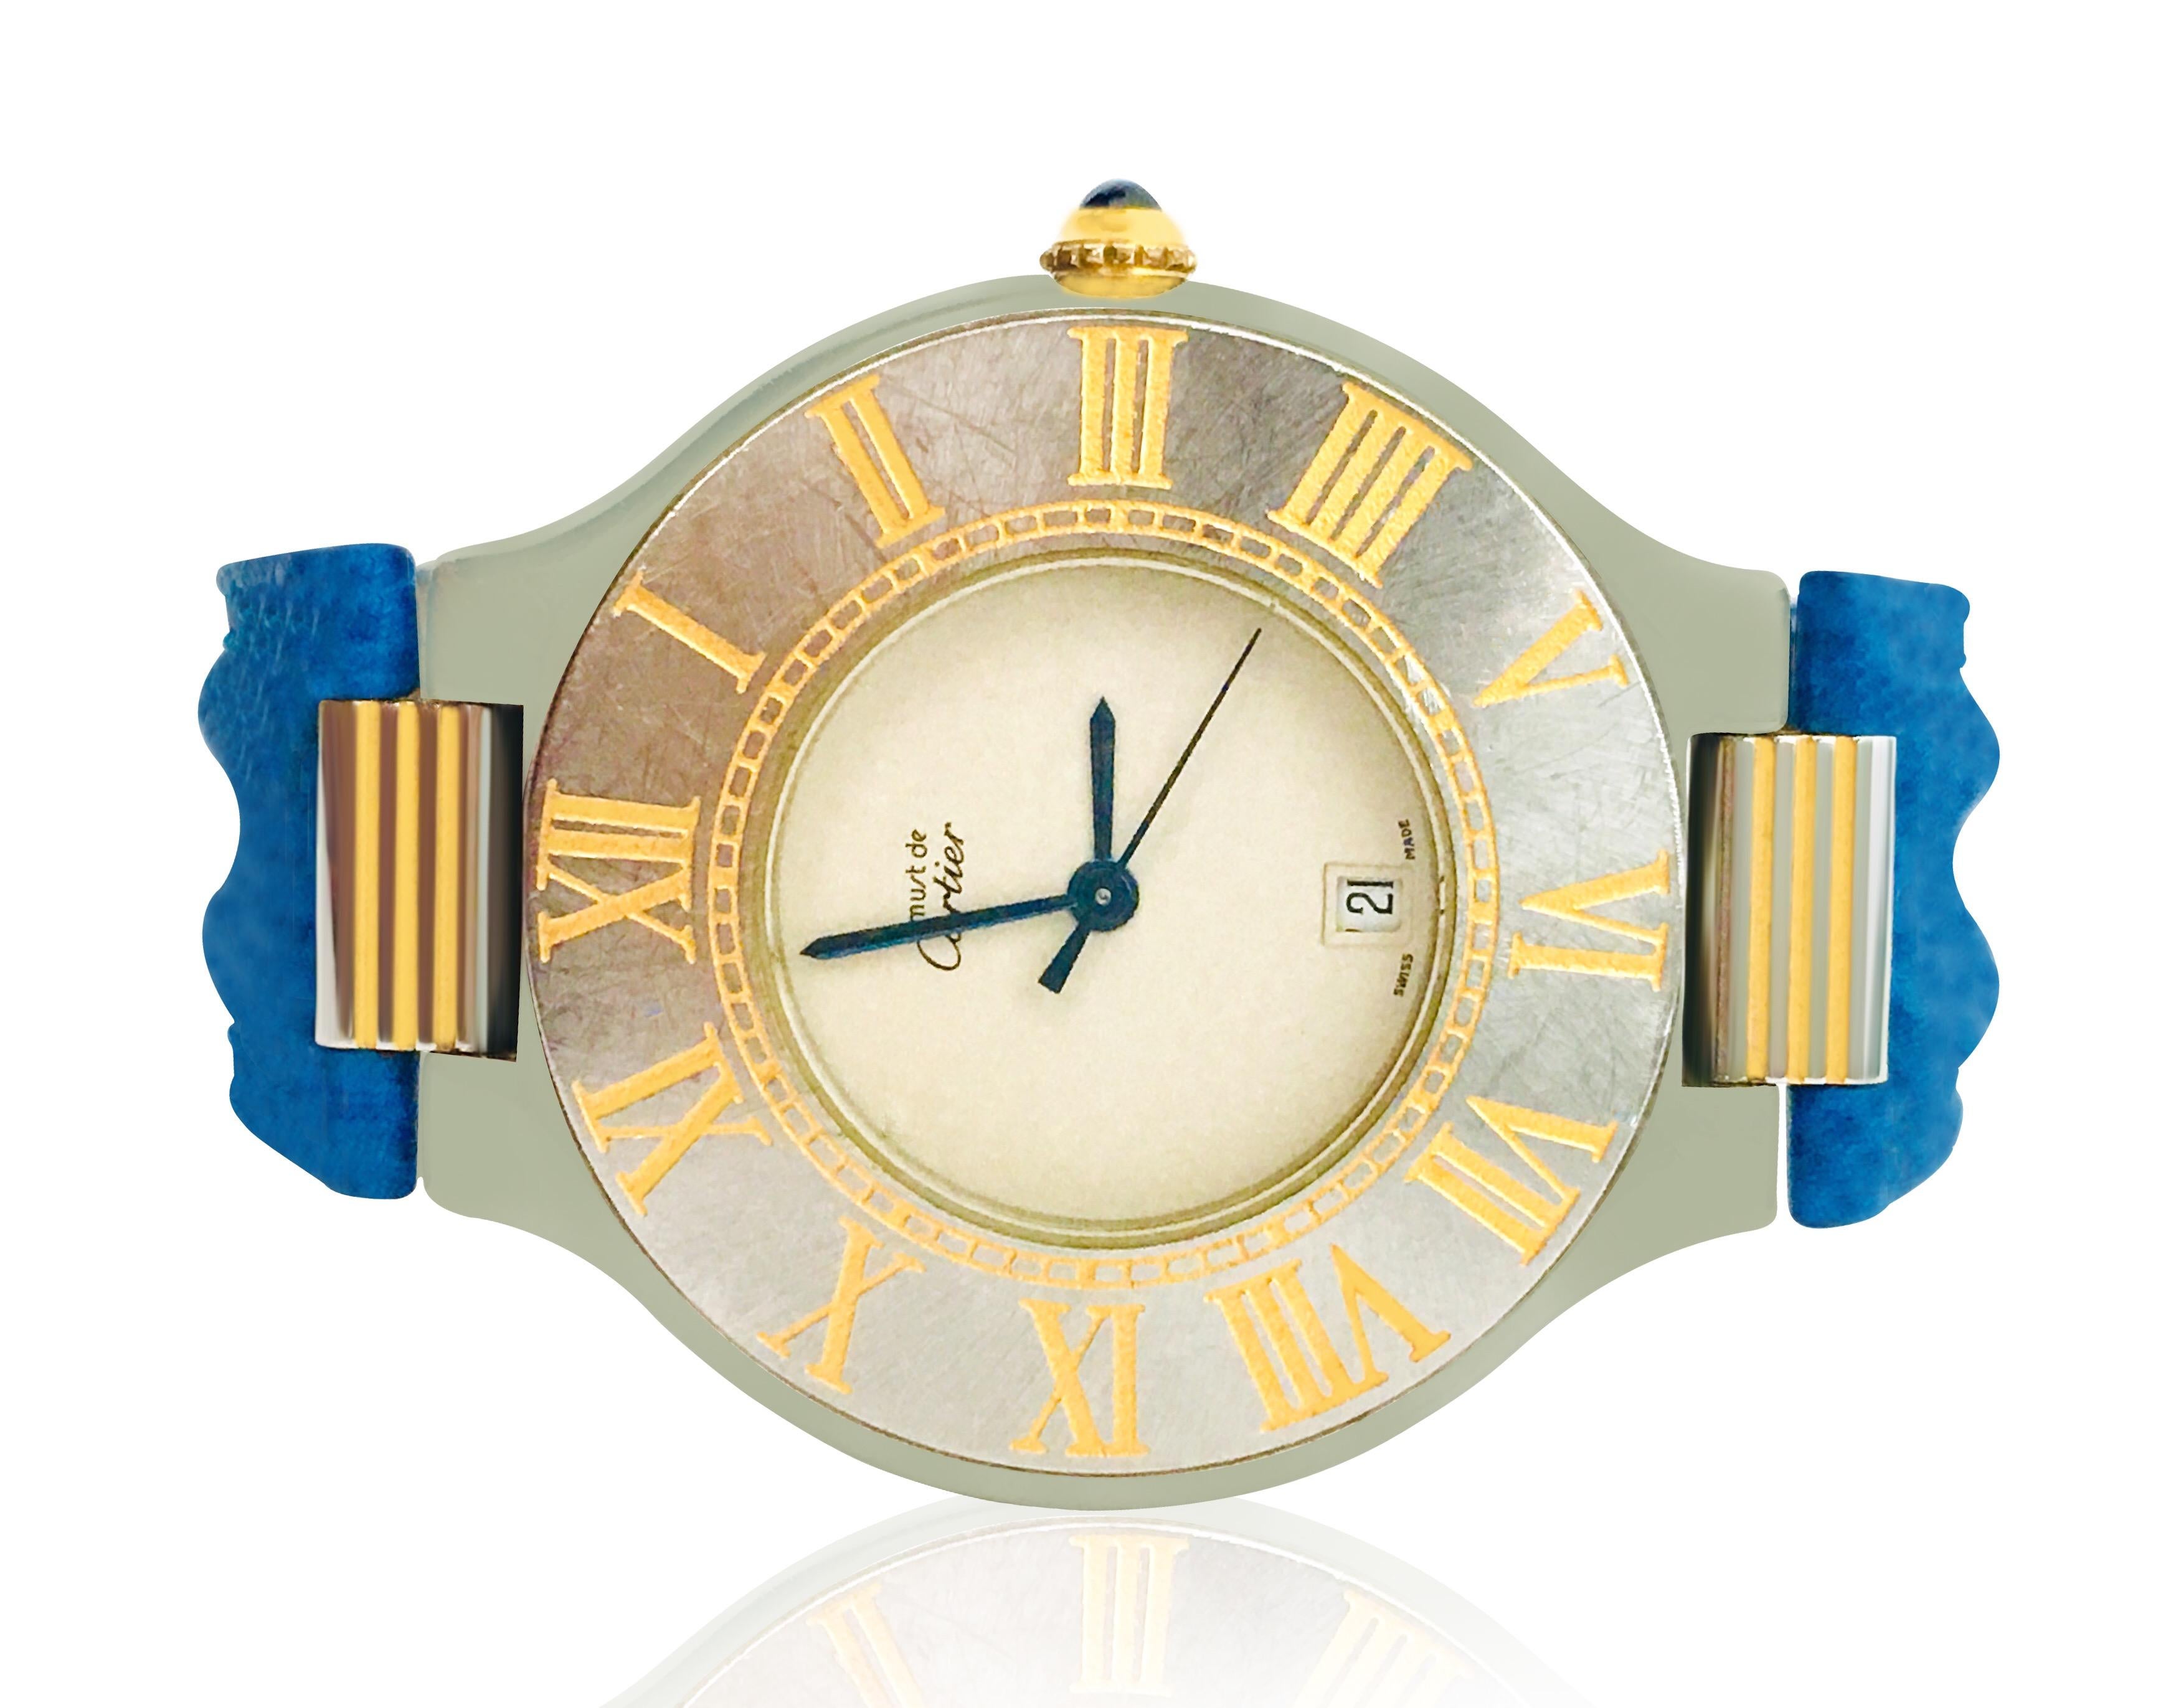 Brand: Cartier. 
Model: Must de 21 Cartier.
Steel and Gold. 
Roman dial in gold. Original Cartier leather band. 
Sapphire glass. 
Clasp: fold. 
Clasp material: stainless steel.
Diameter: 35mm. 
Watch comes with two bands, Azure blue color & deep